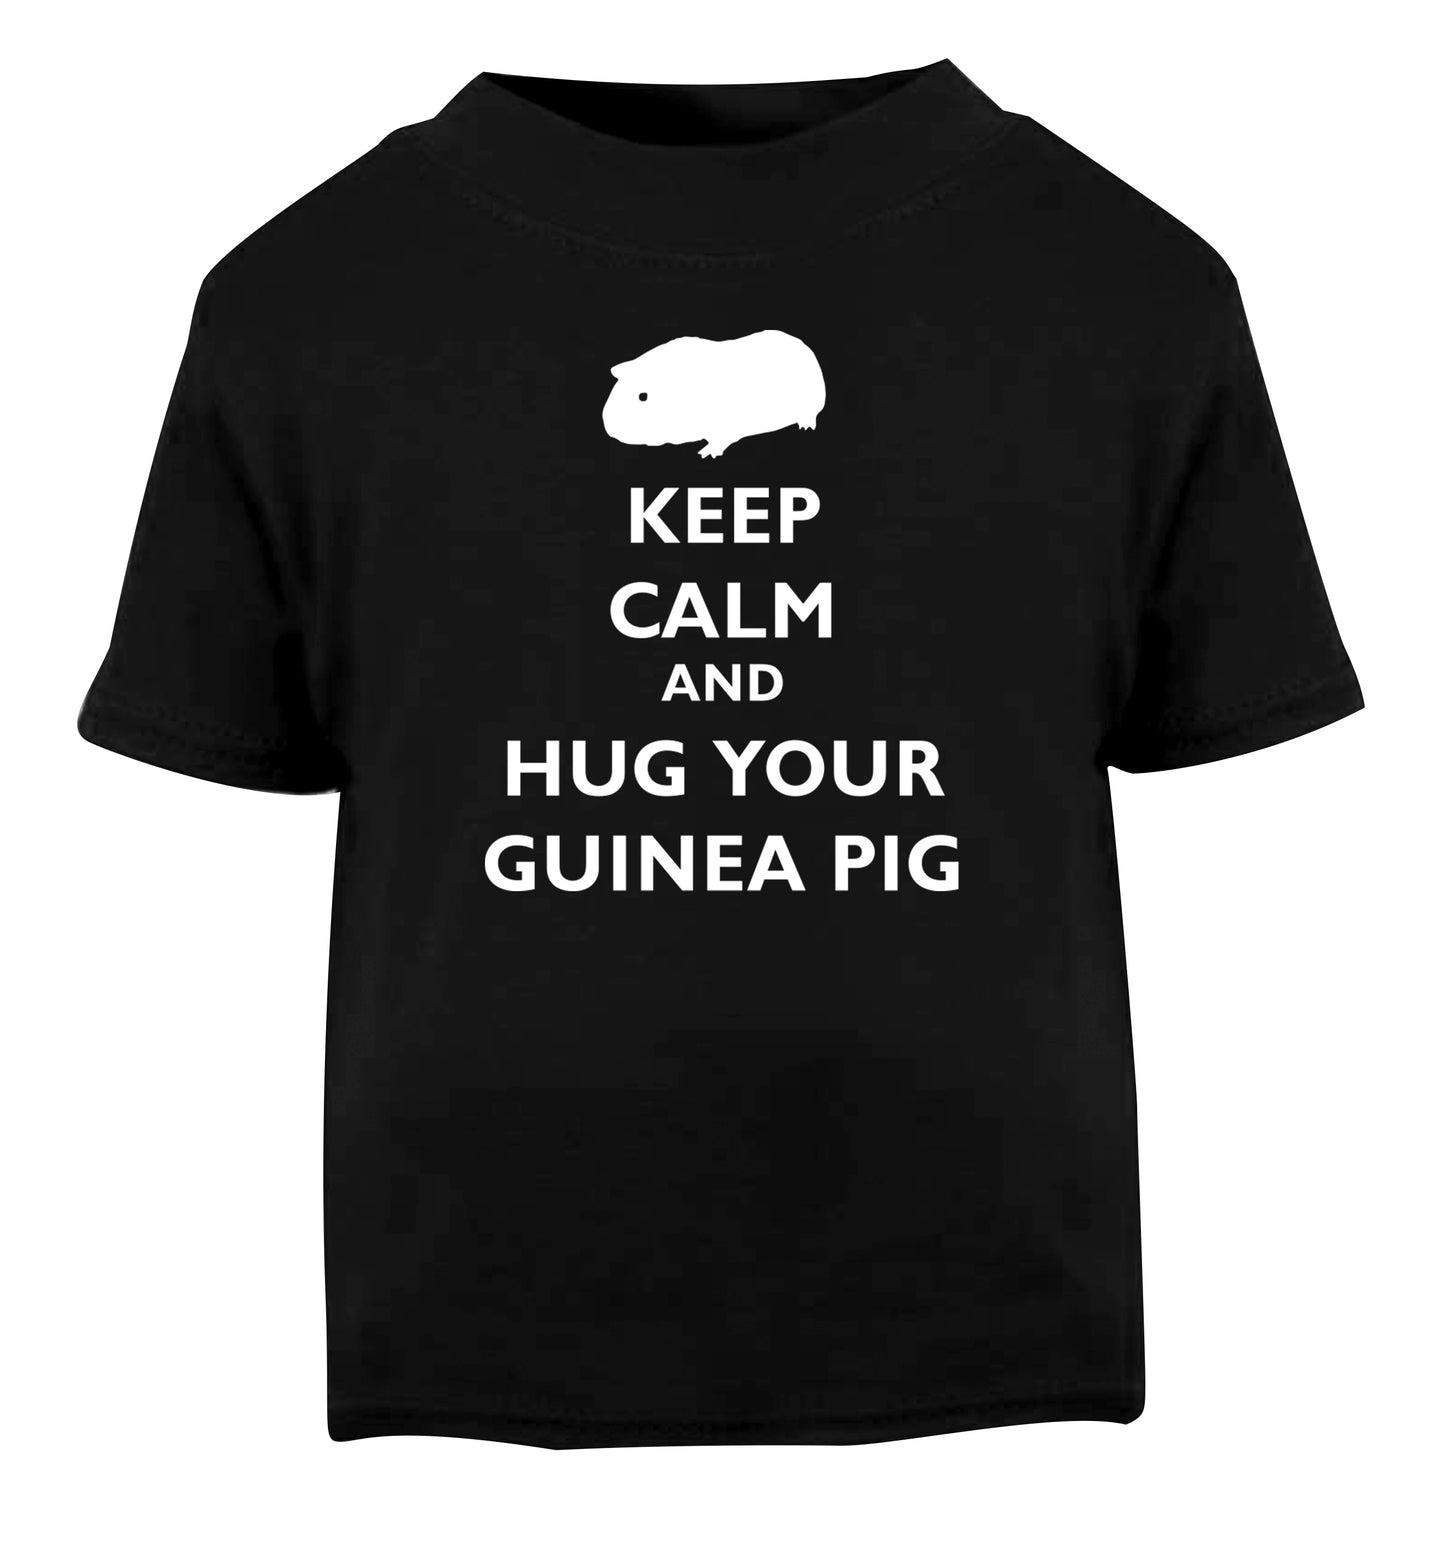 Keep calm and hug your guineapig Black Baby Toddler Tshirt 2 years